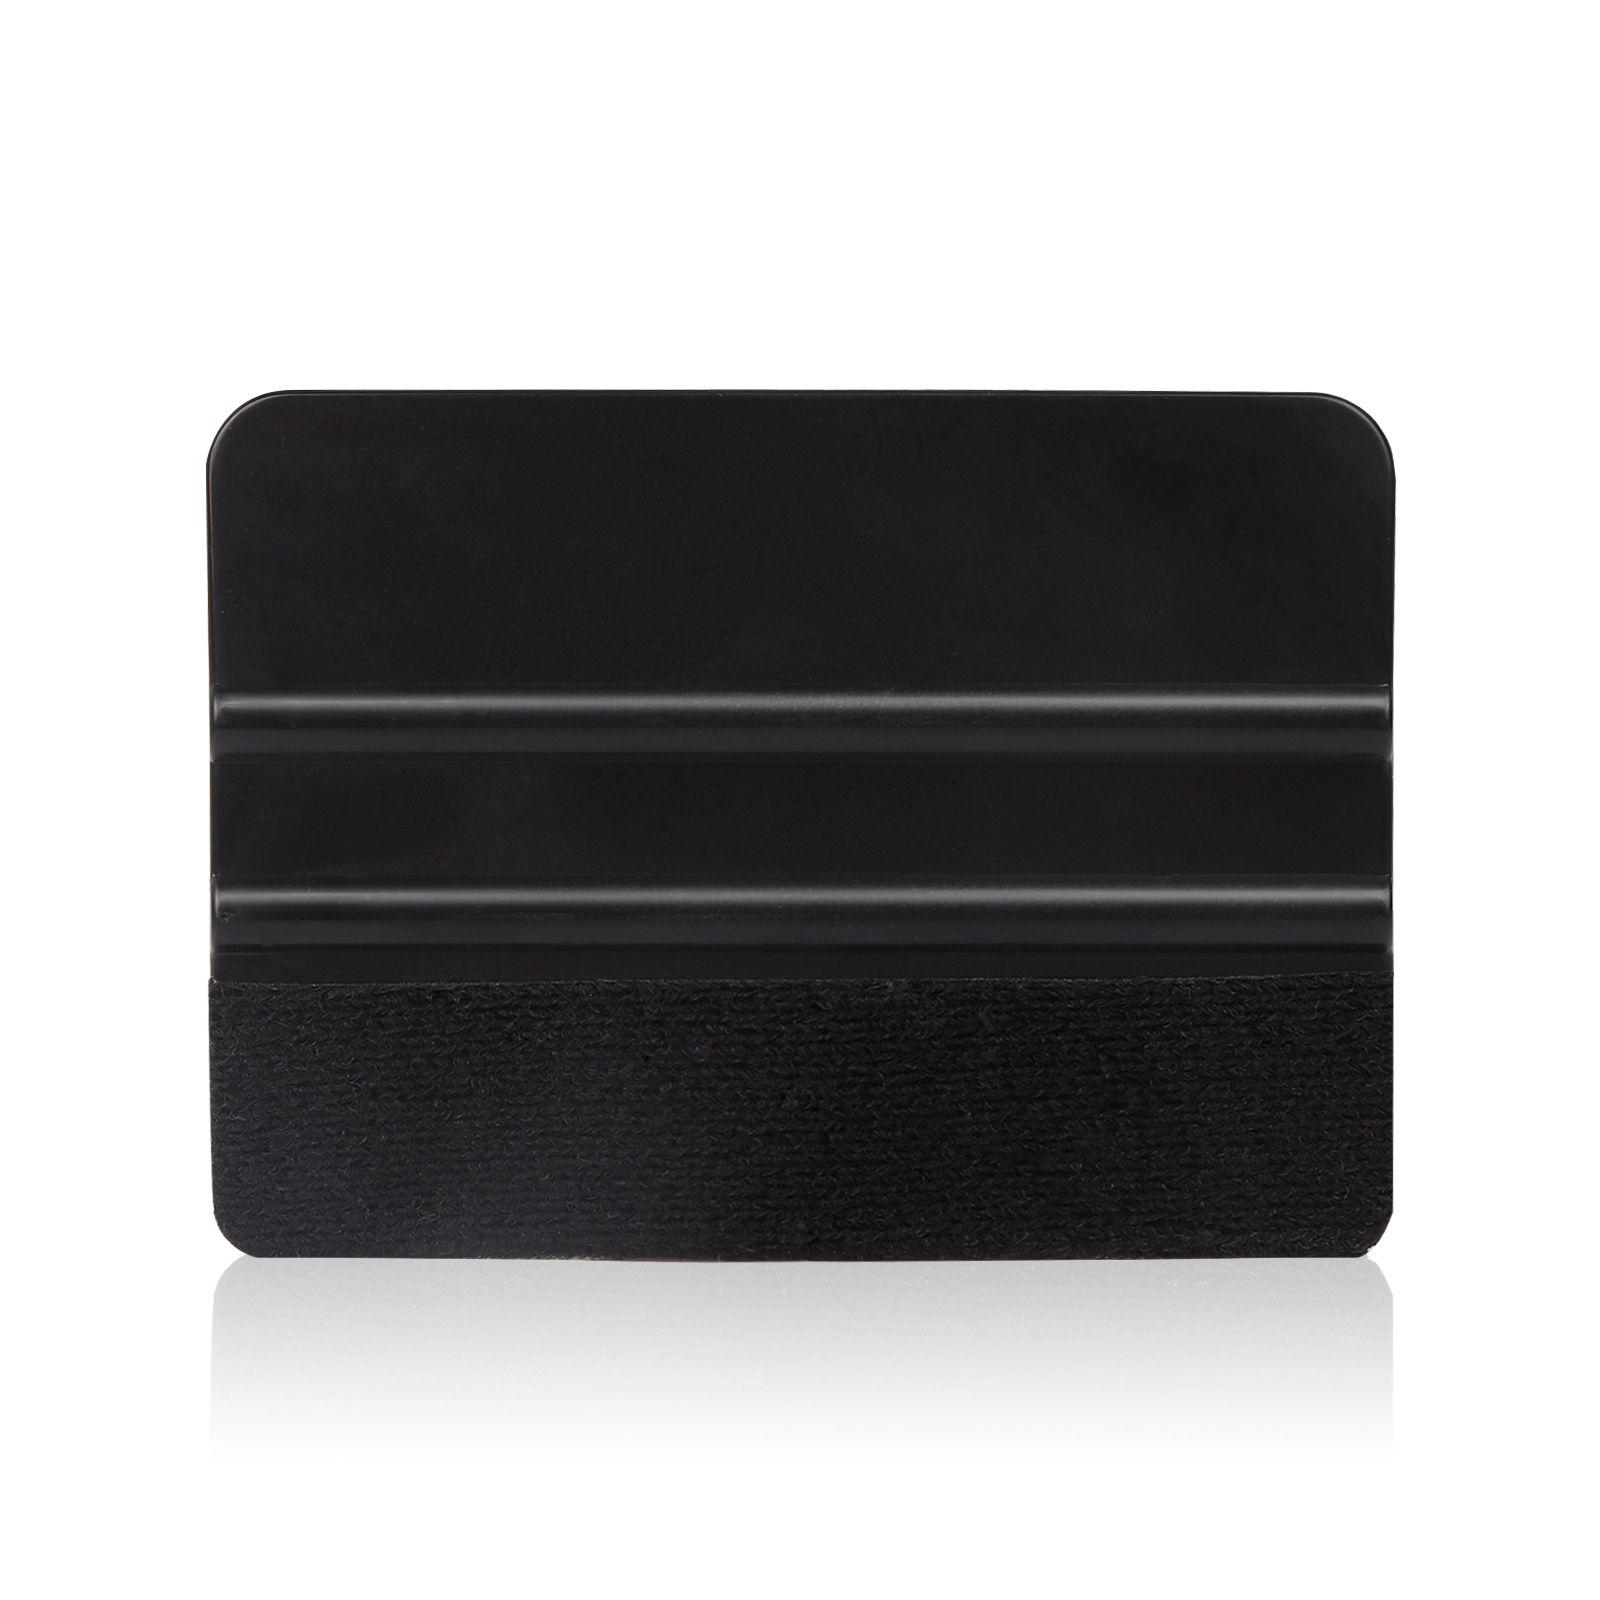 4'' x 3'' Black Squeegee, Medium Hardness, with Black Fabric Felt for Vinyl and Film Application